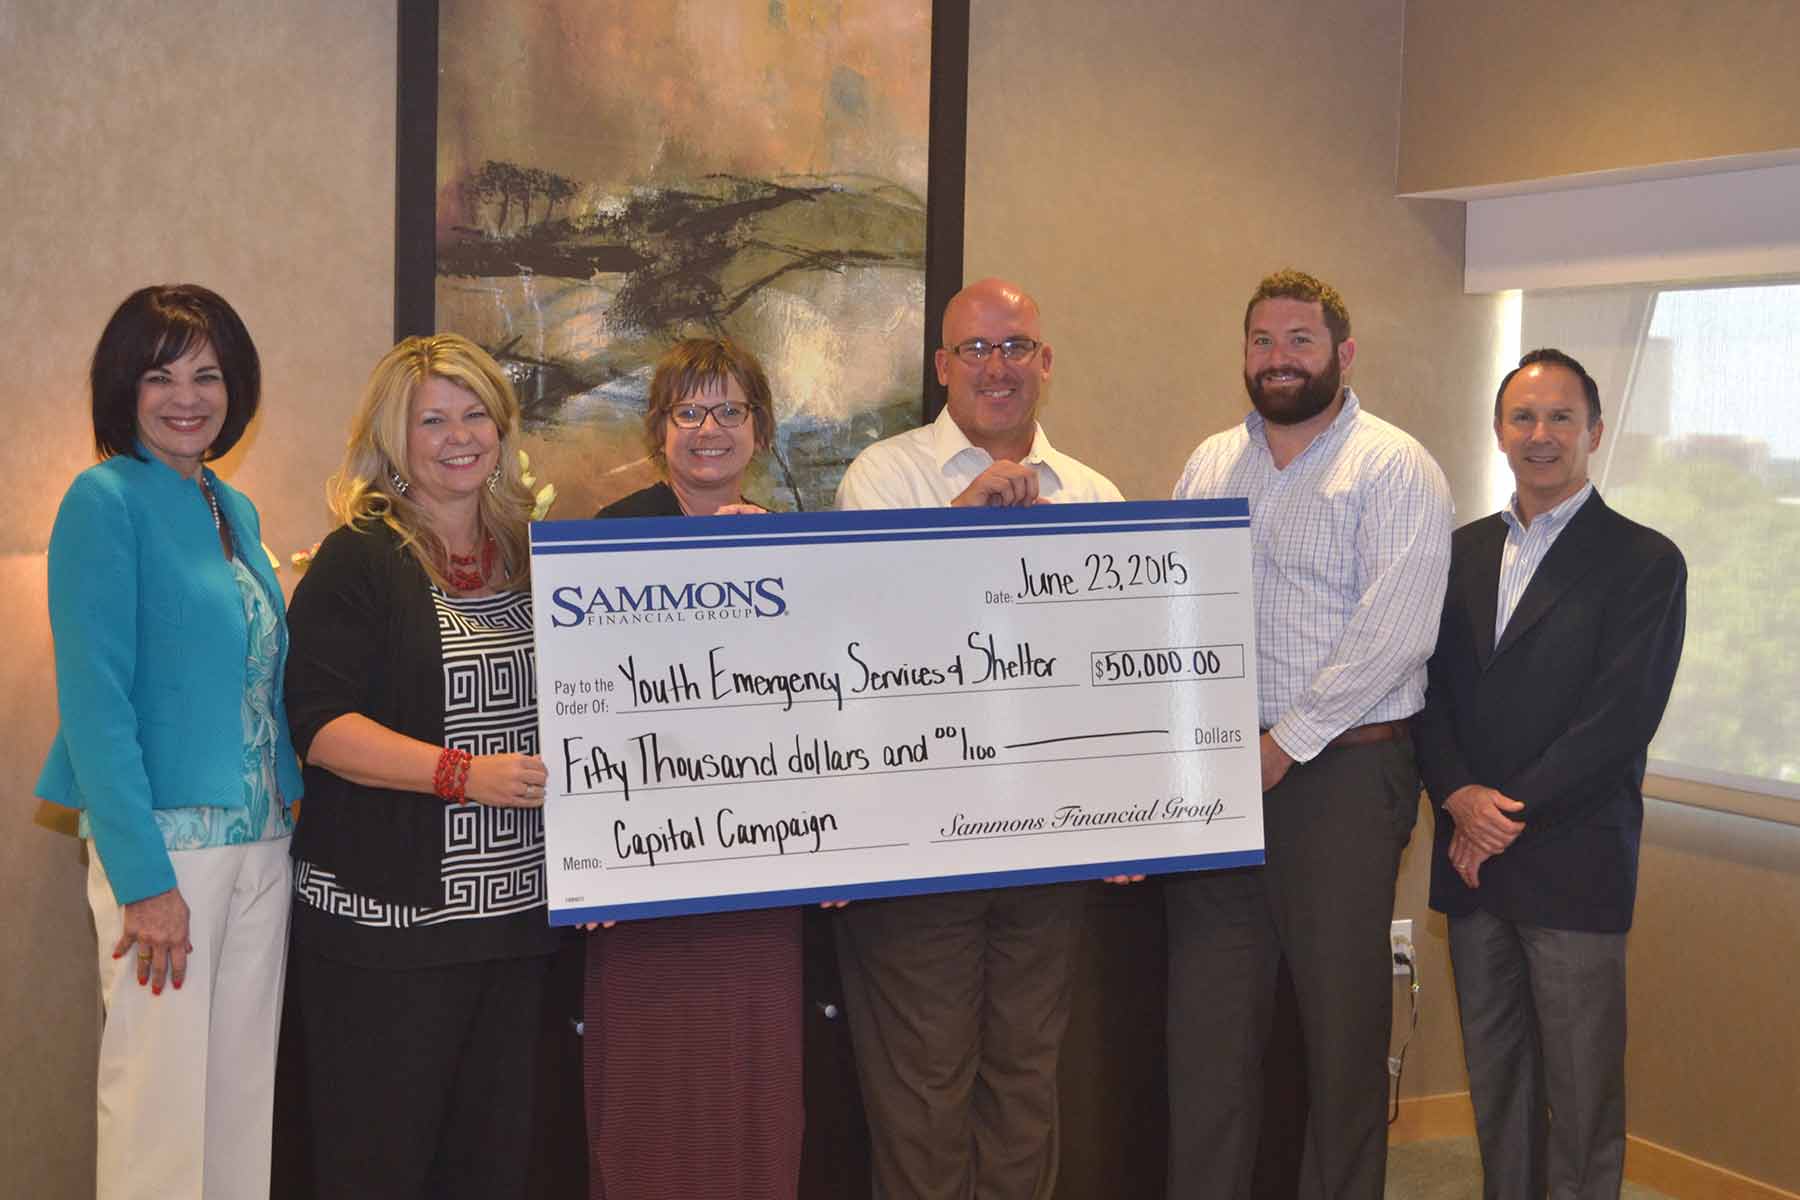 A group photo of Sammons Financial Group employees holding a $50,000 check donated to Youth Emergency Services and Shelter.